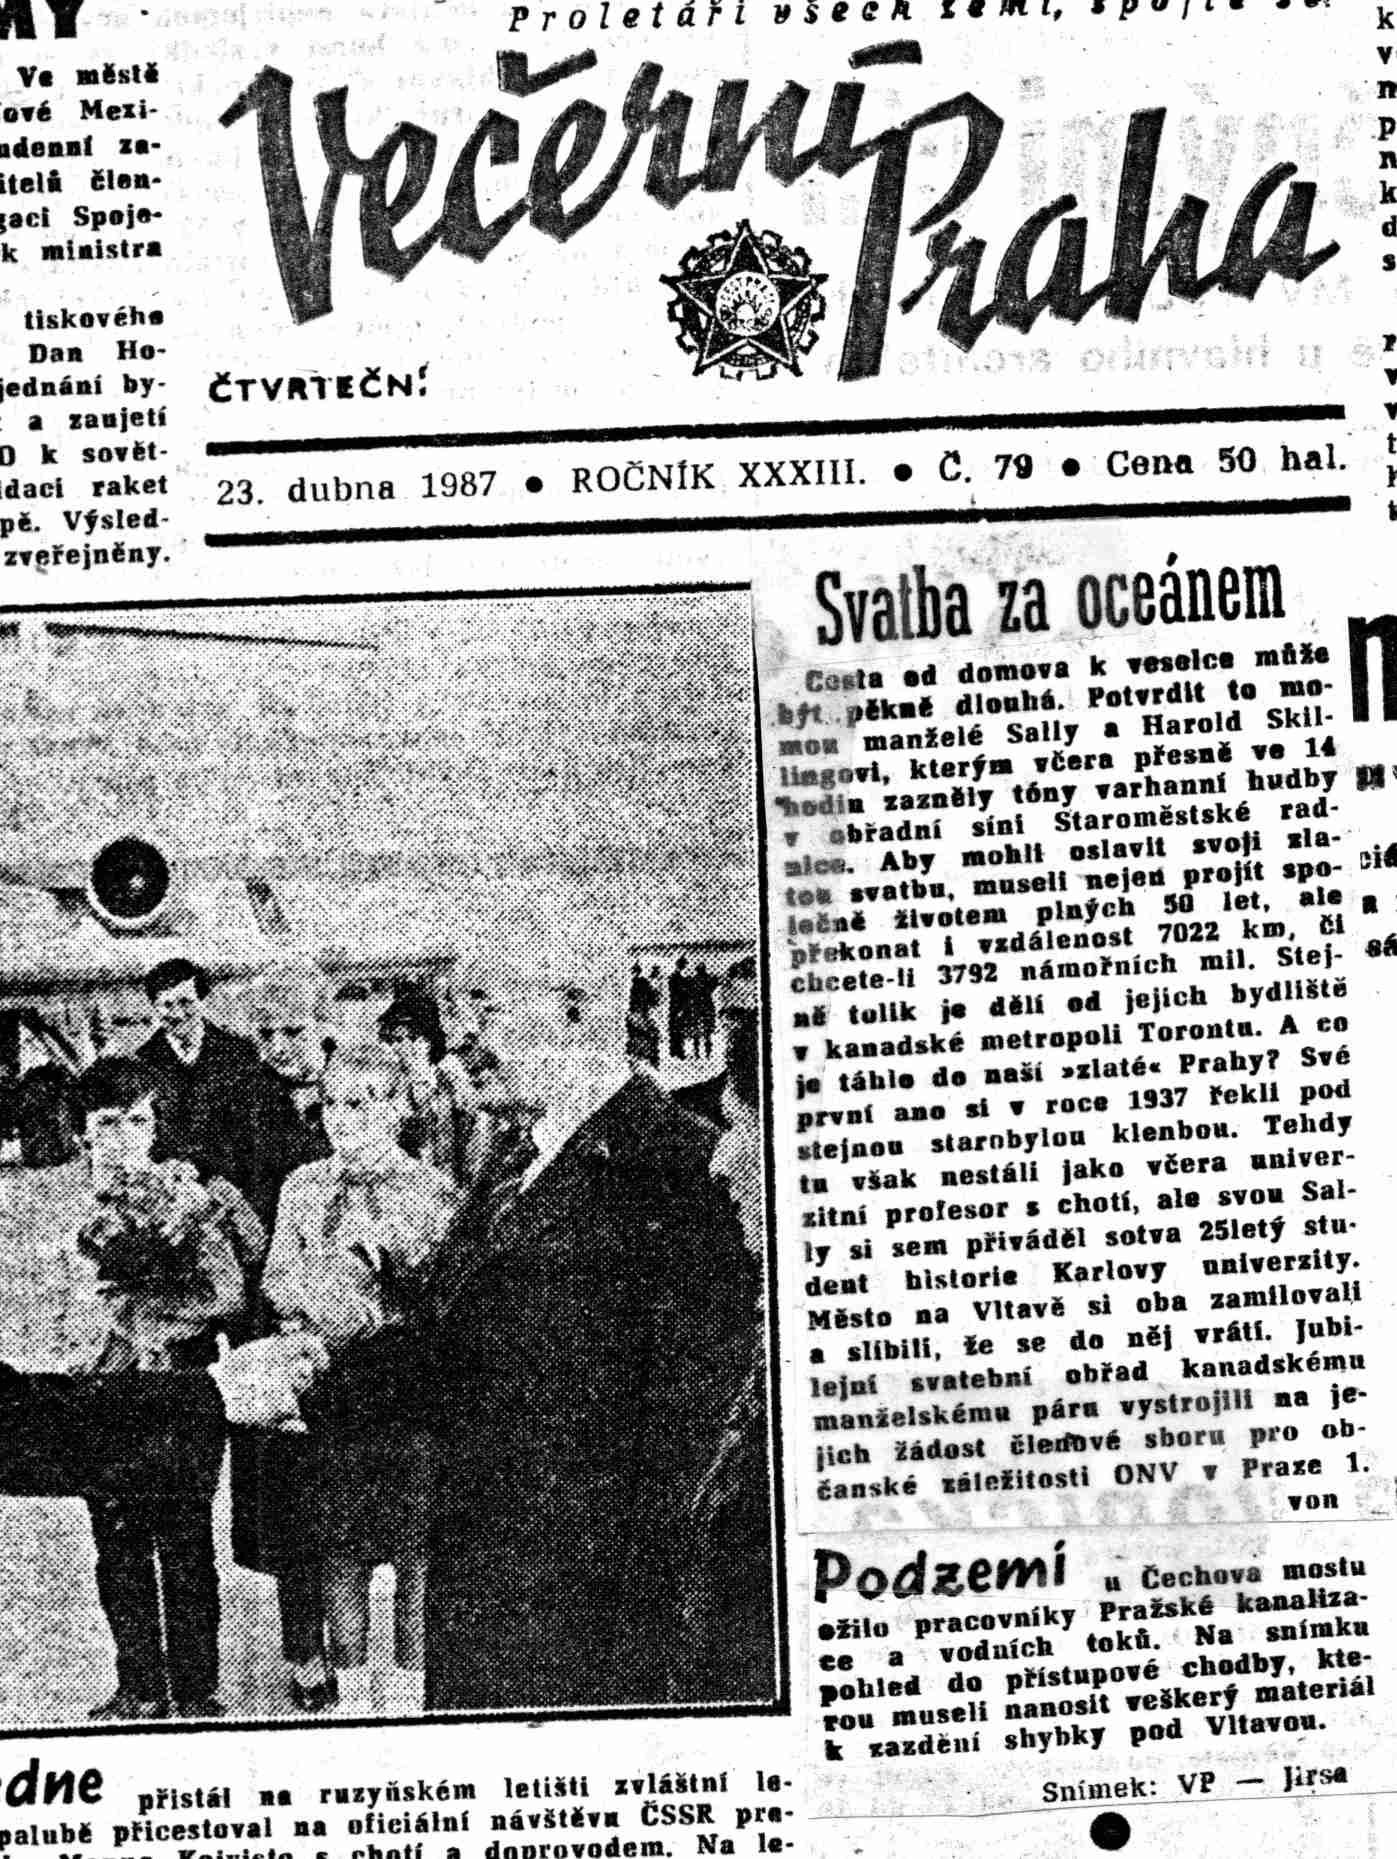 Notes in newspaper about Golden Wedding of Skillings